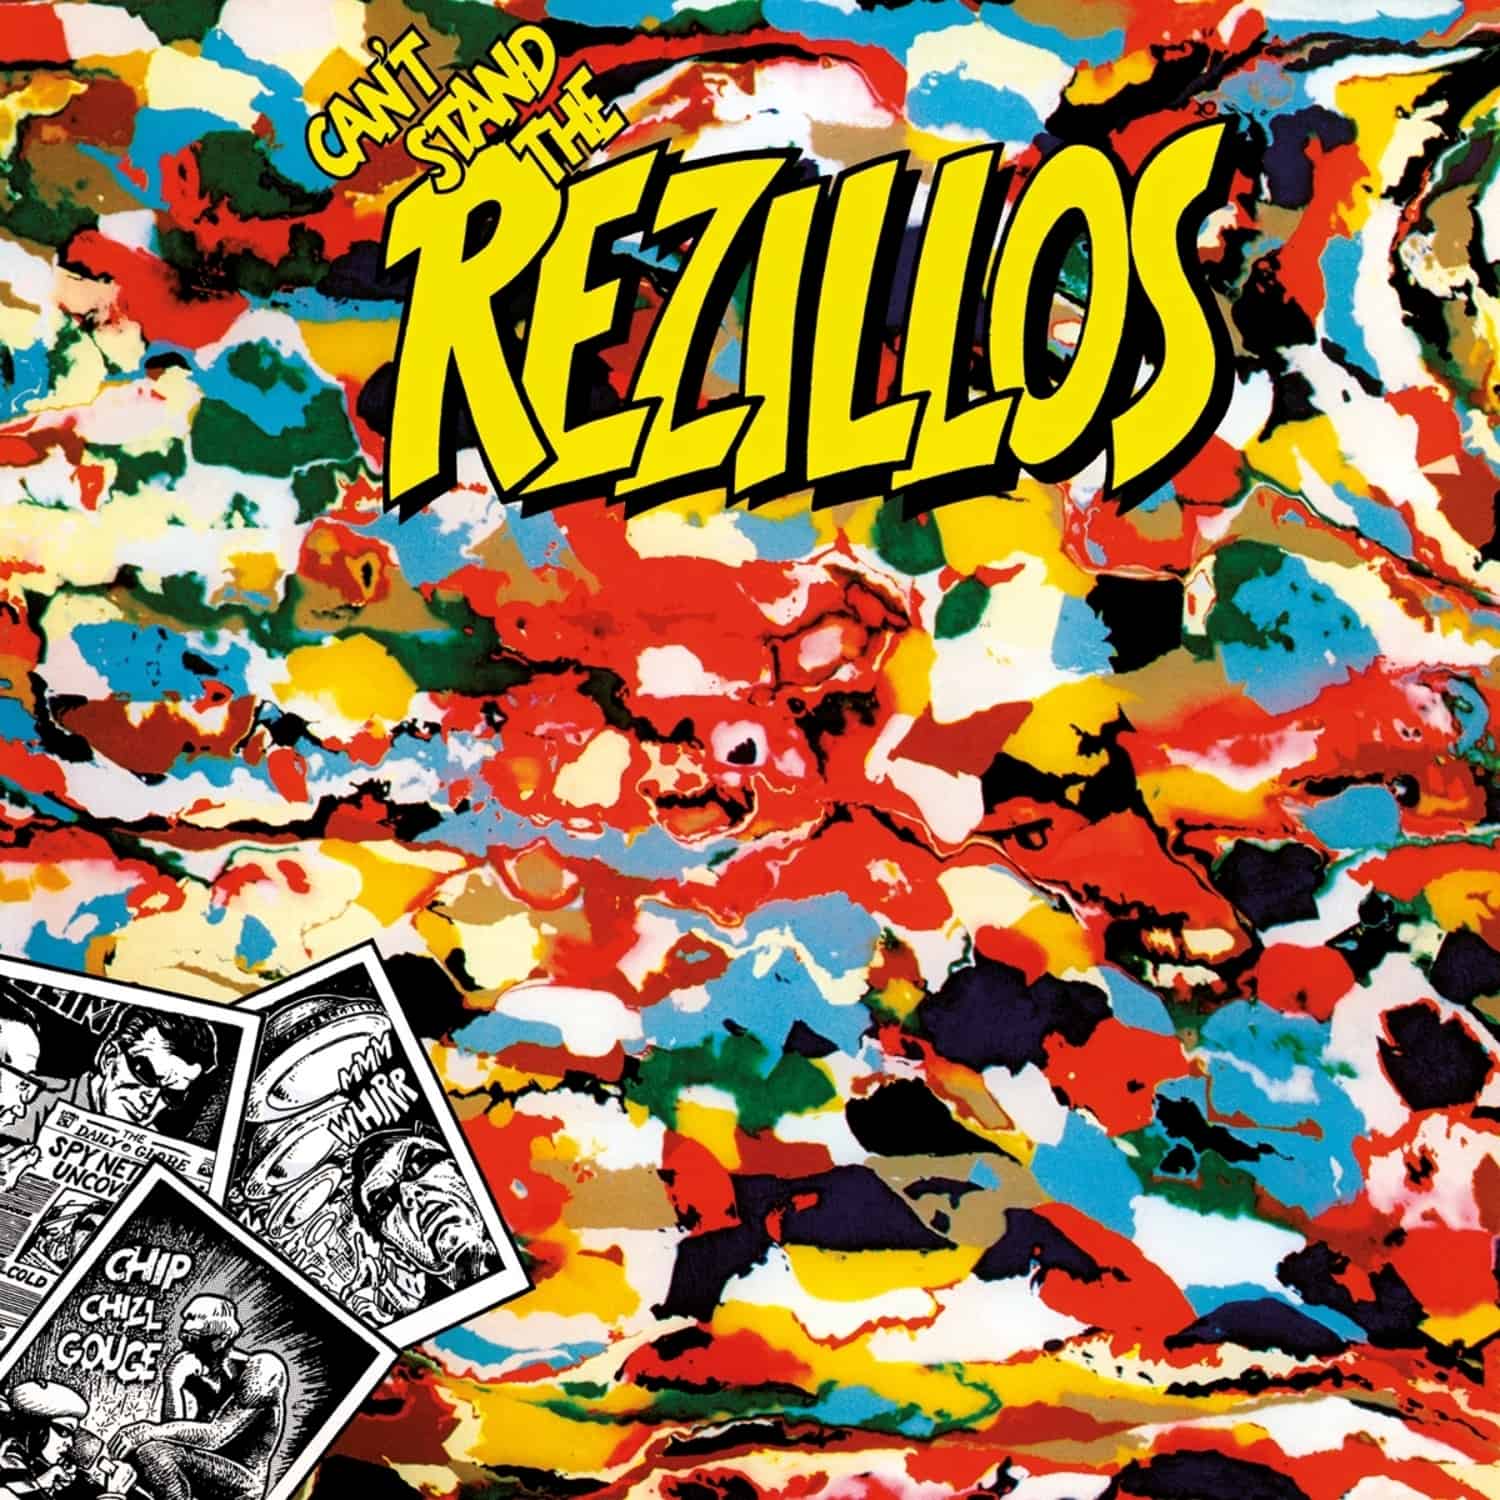 Rezillos - CAN T STAND THE REZILLOS 